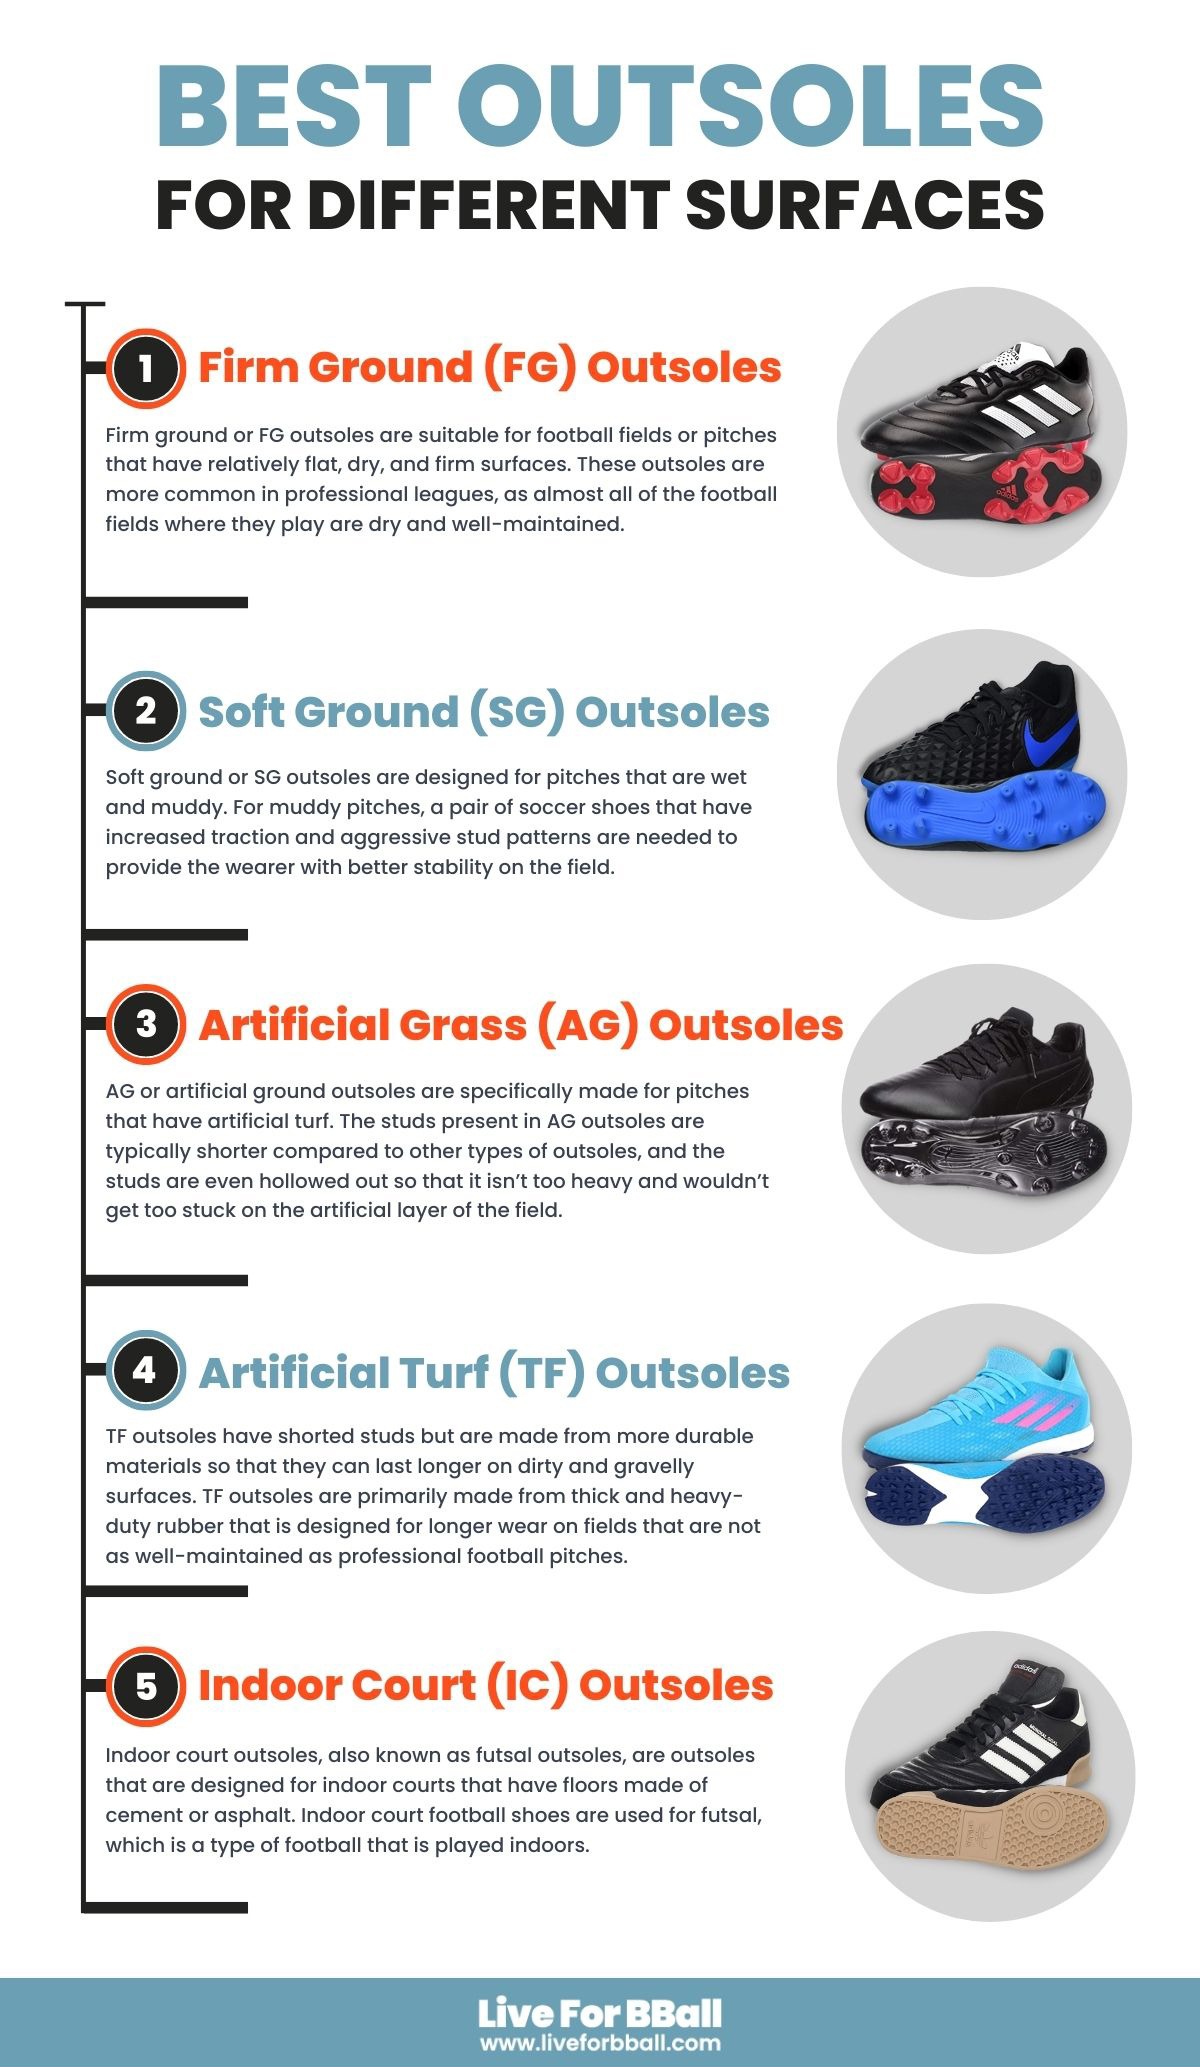 Best Outsoles for Different Surfaces